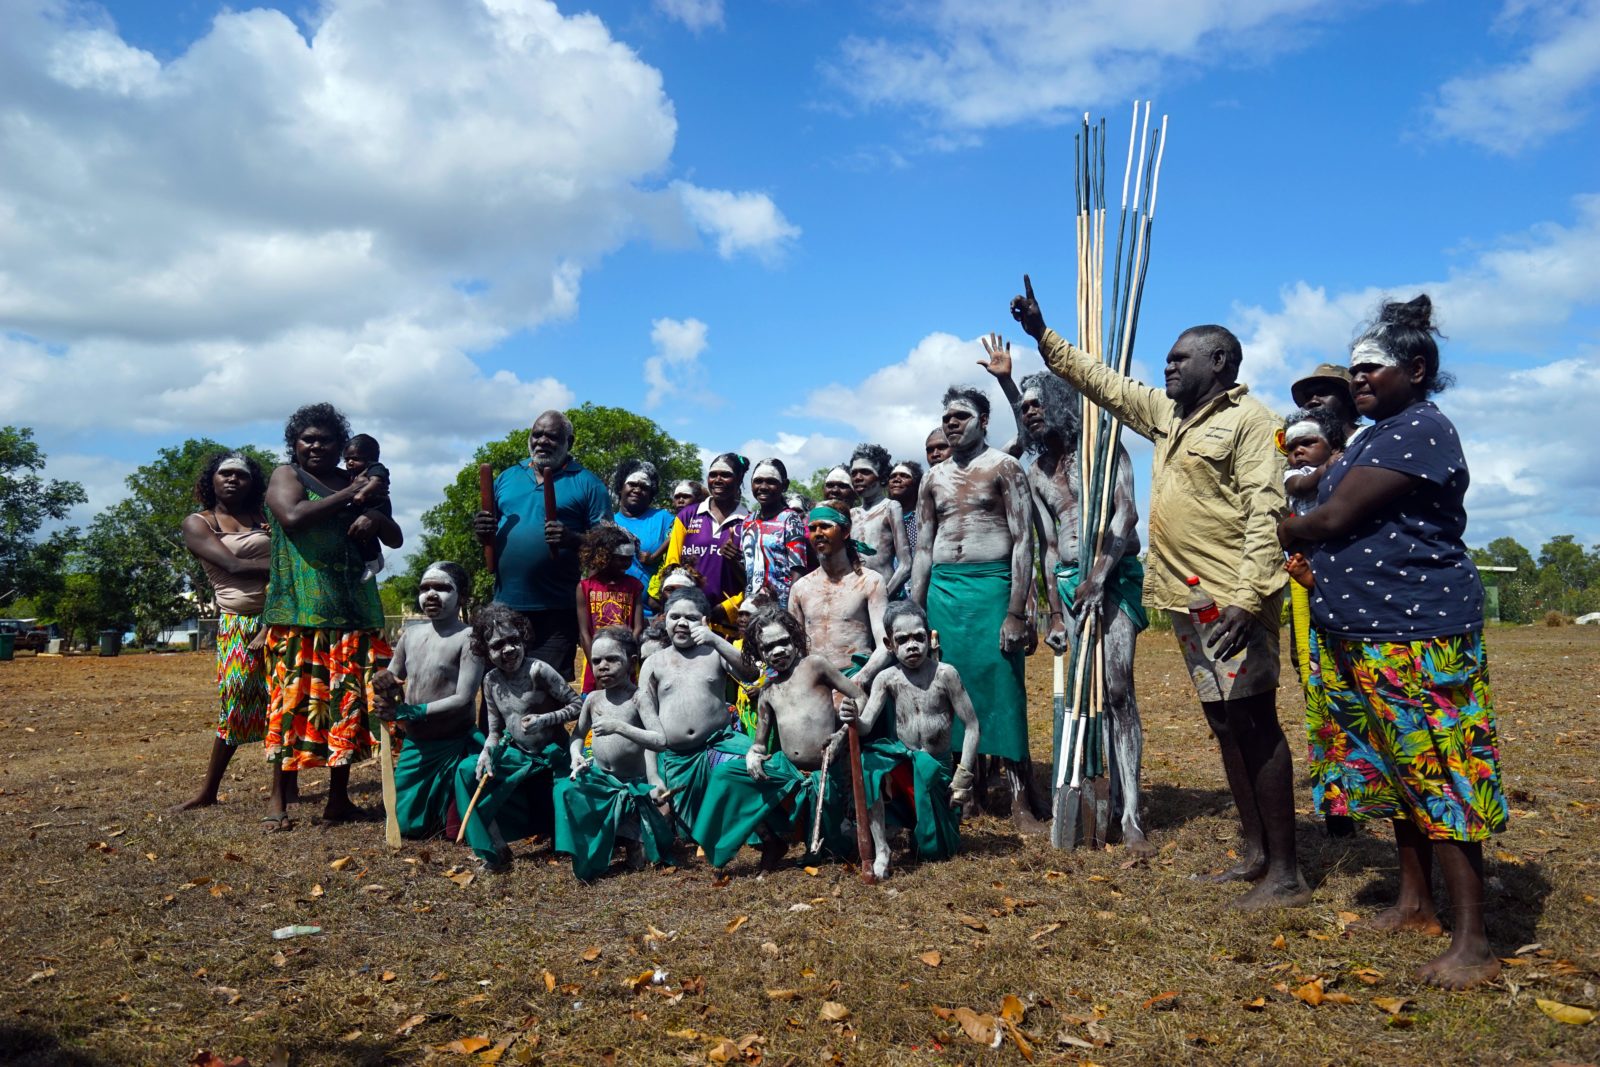 Dhalinybuy community after traditional welcome dance